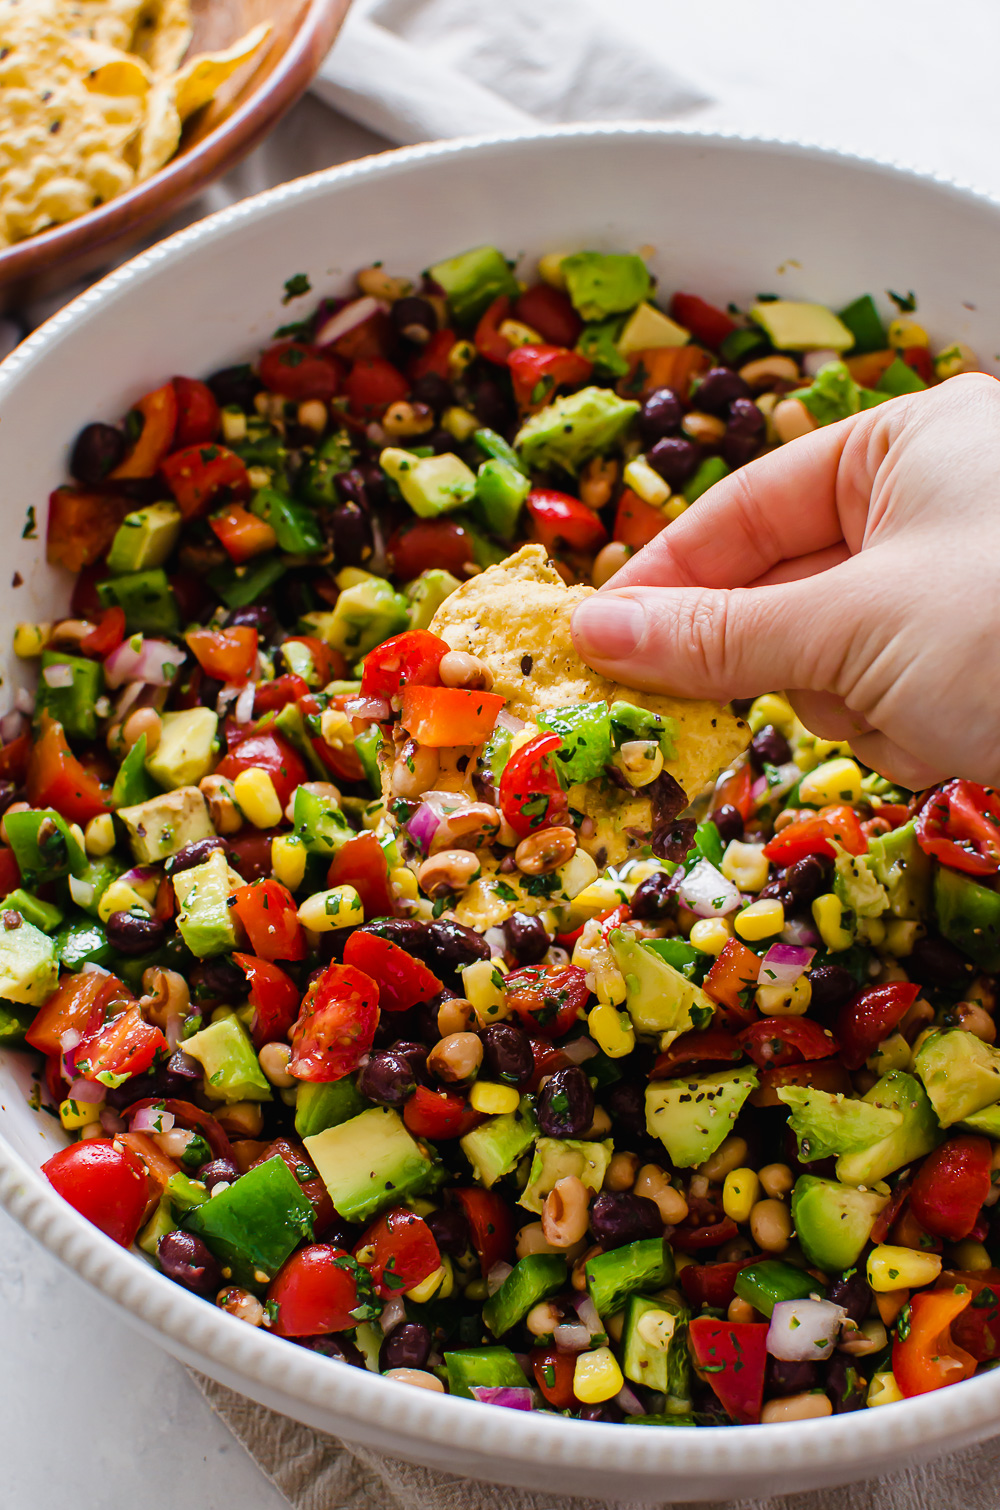 Fiesta chopped salad in a white bowl with a hand dipping in with a chip.